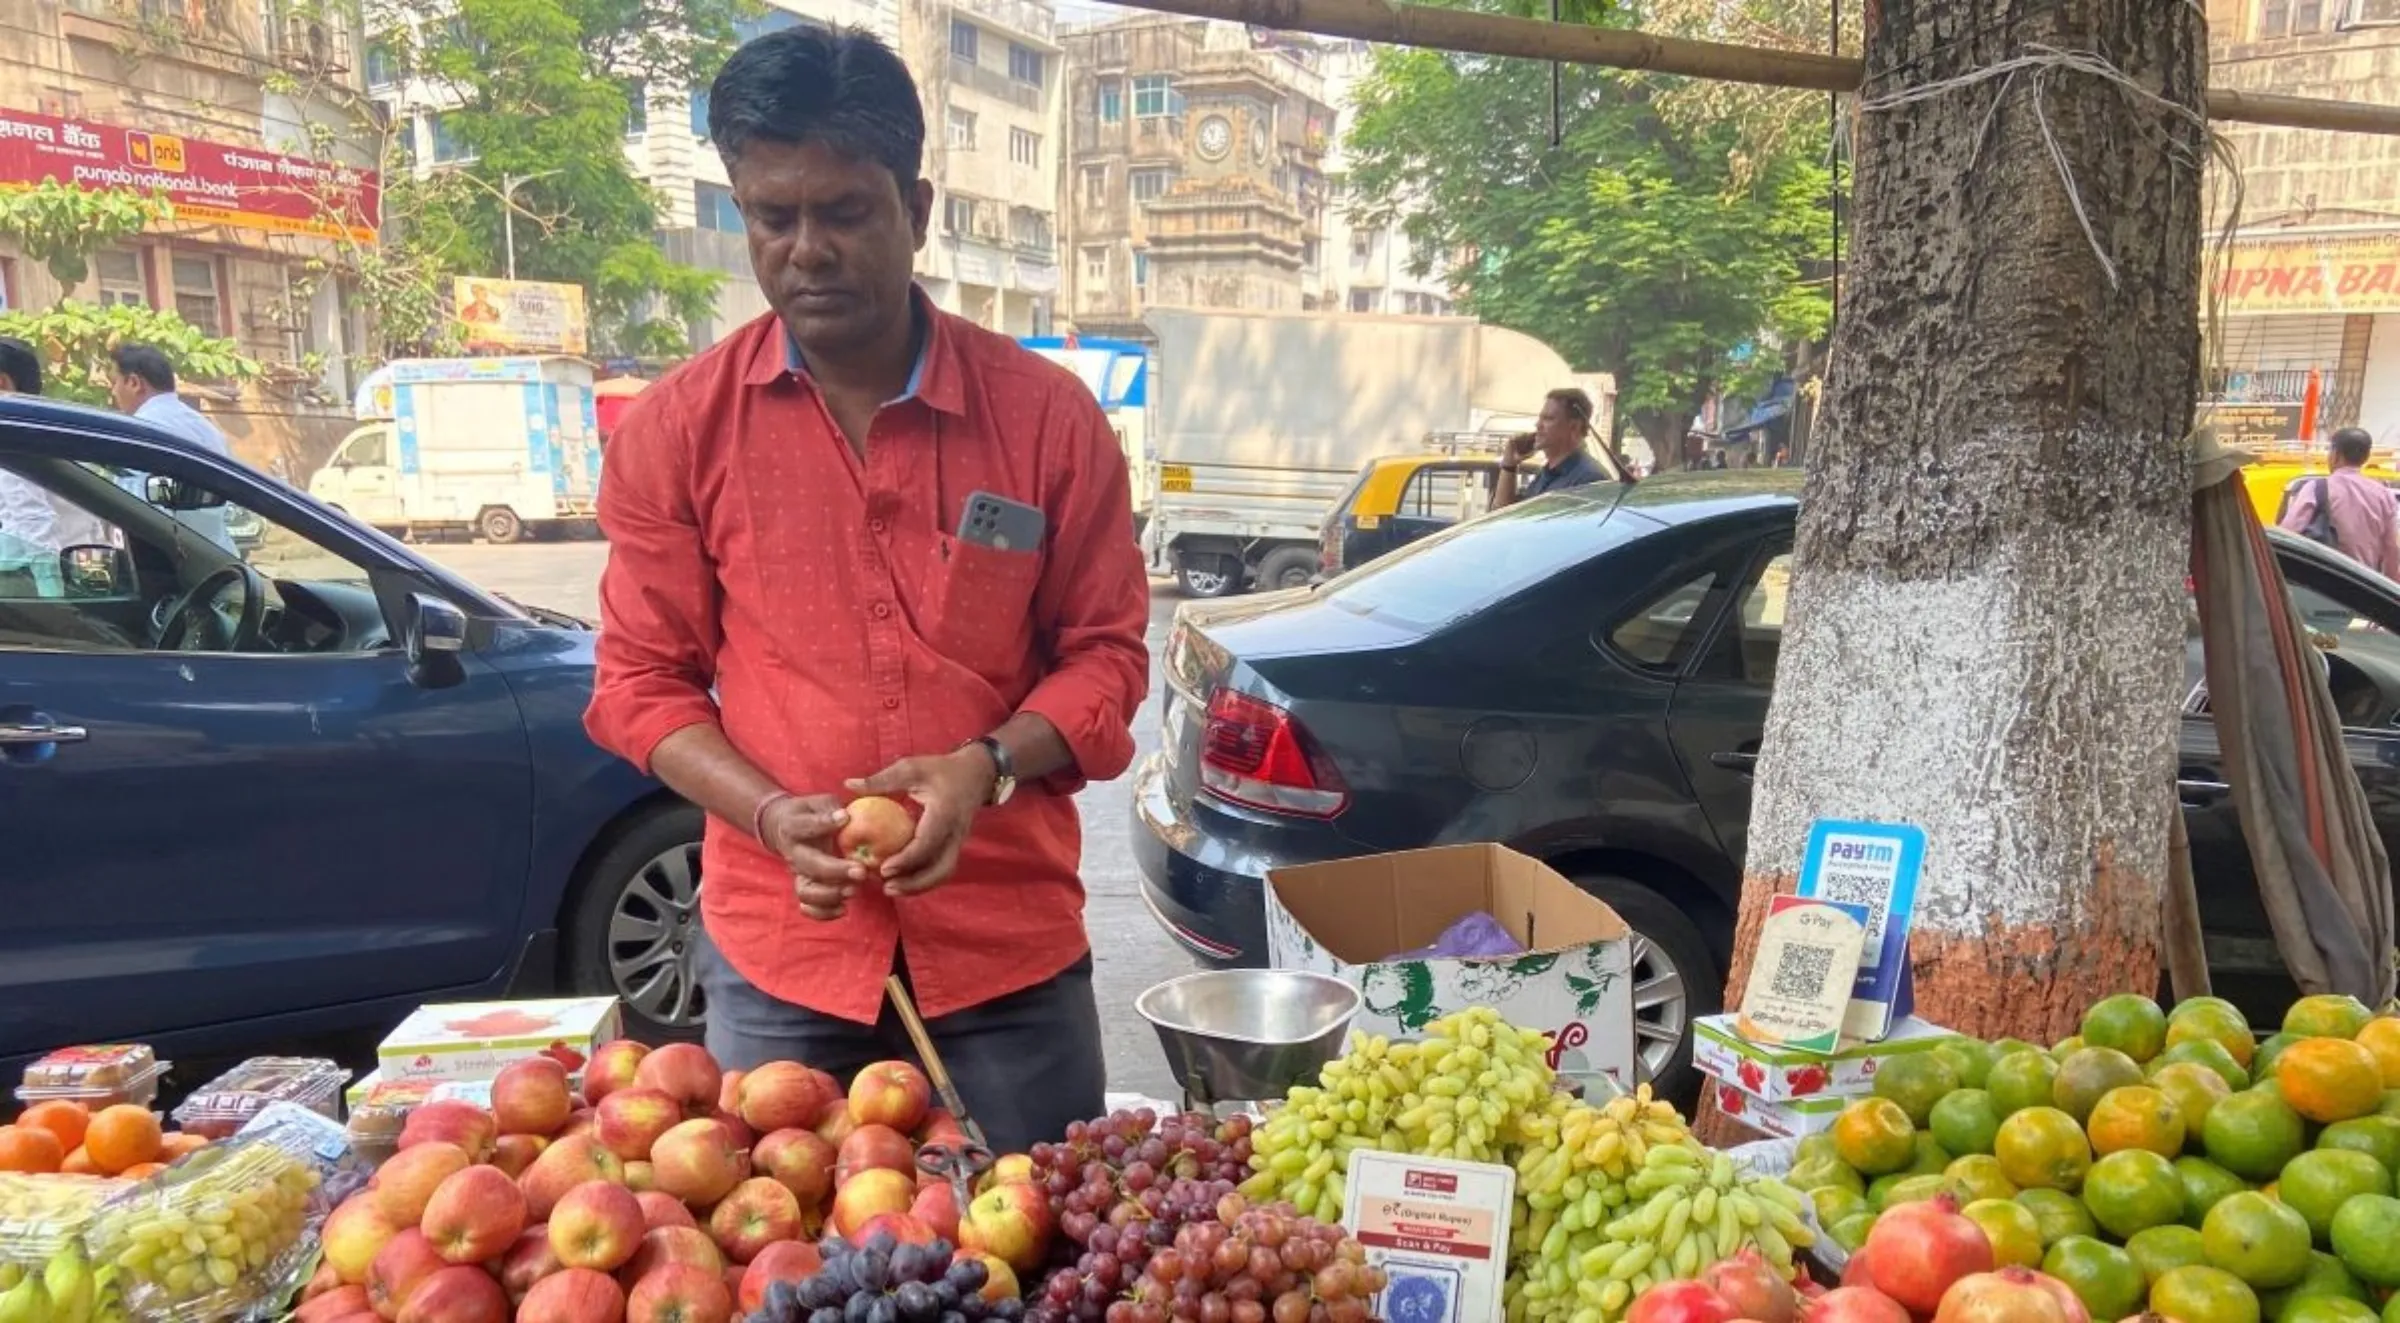 Bachche Lal Sahani, who is among the first users of the Reserve Bank of India’s digital currency, arranges fruits at his stall in Mumbai, India, March 2, 2023. Thomson Reuters Foundation/Roli Srivastava